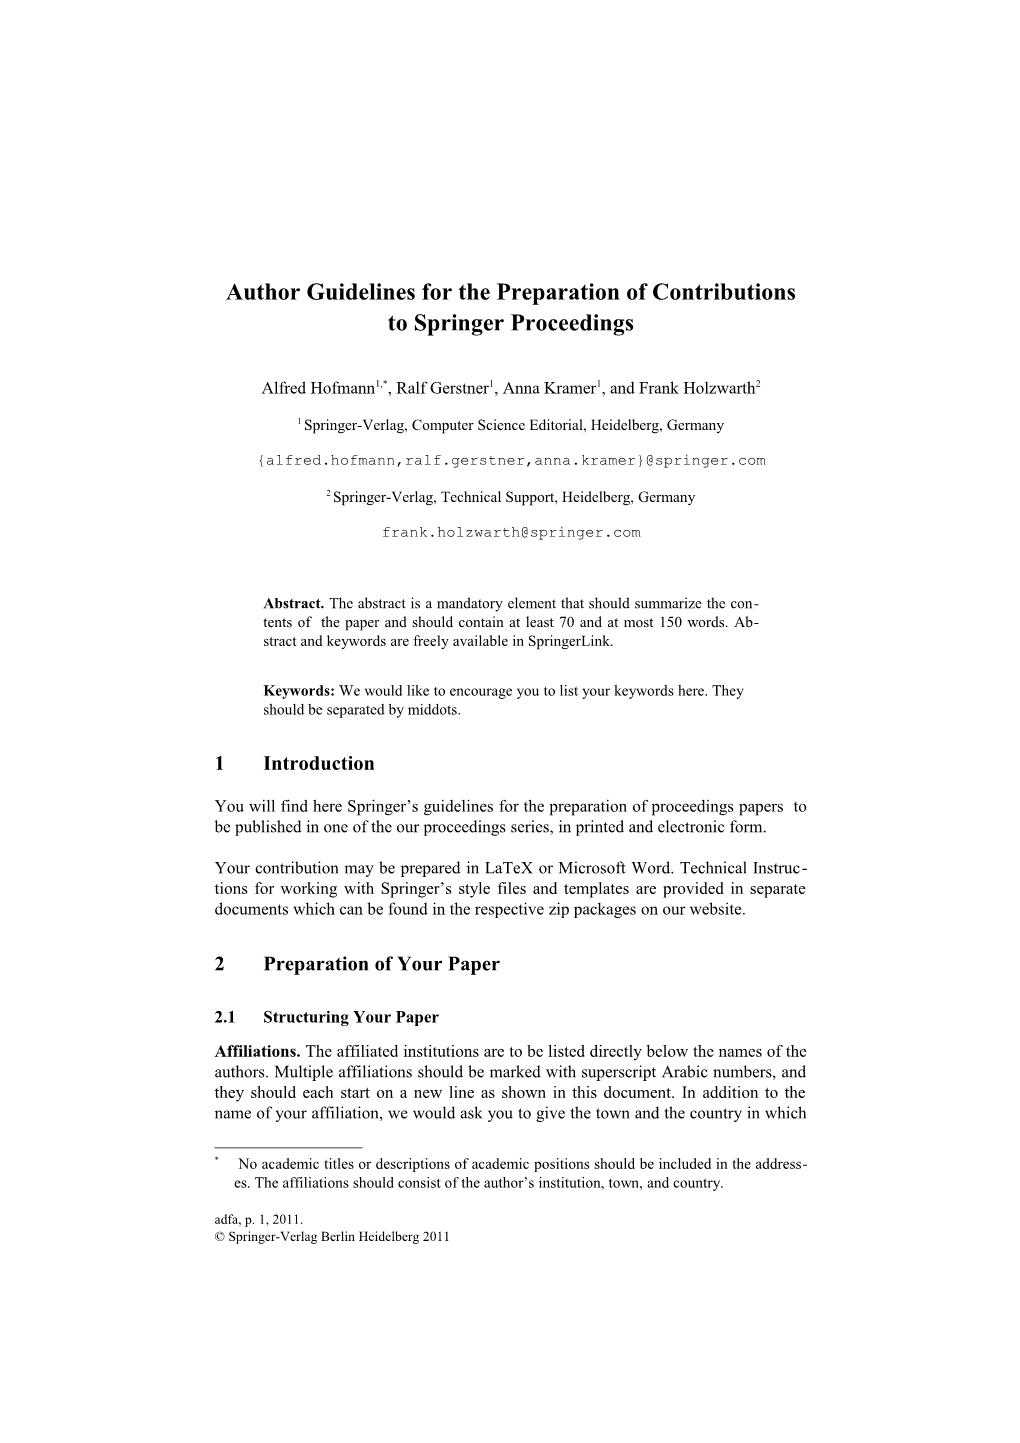 Author Guidelines for the Preparation of Contributions to Springer Proceedings